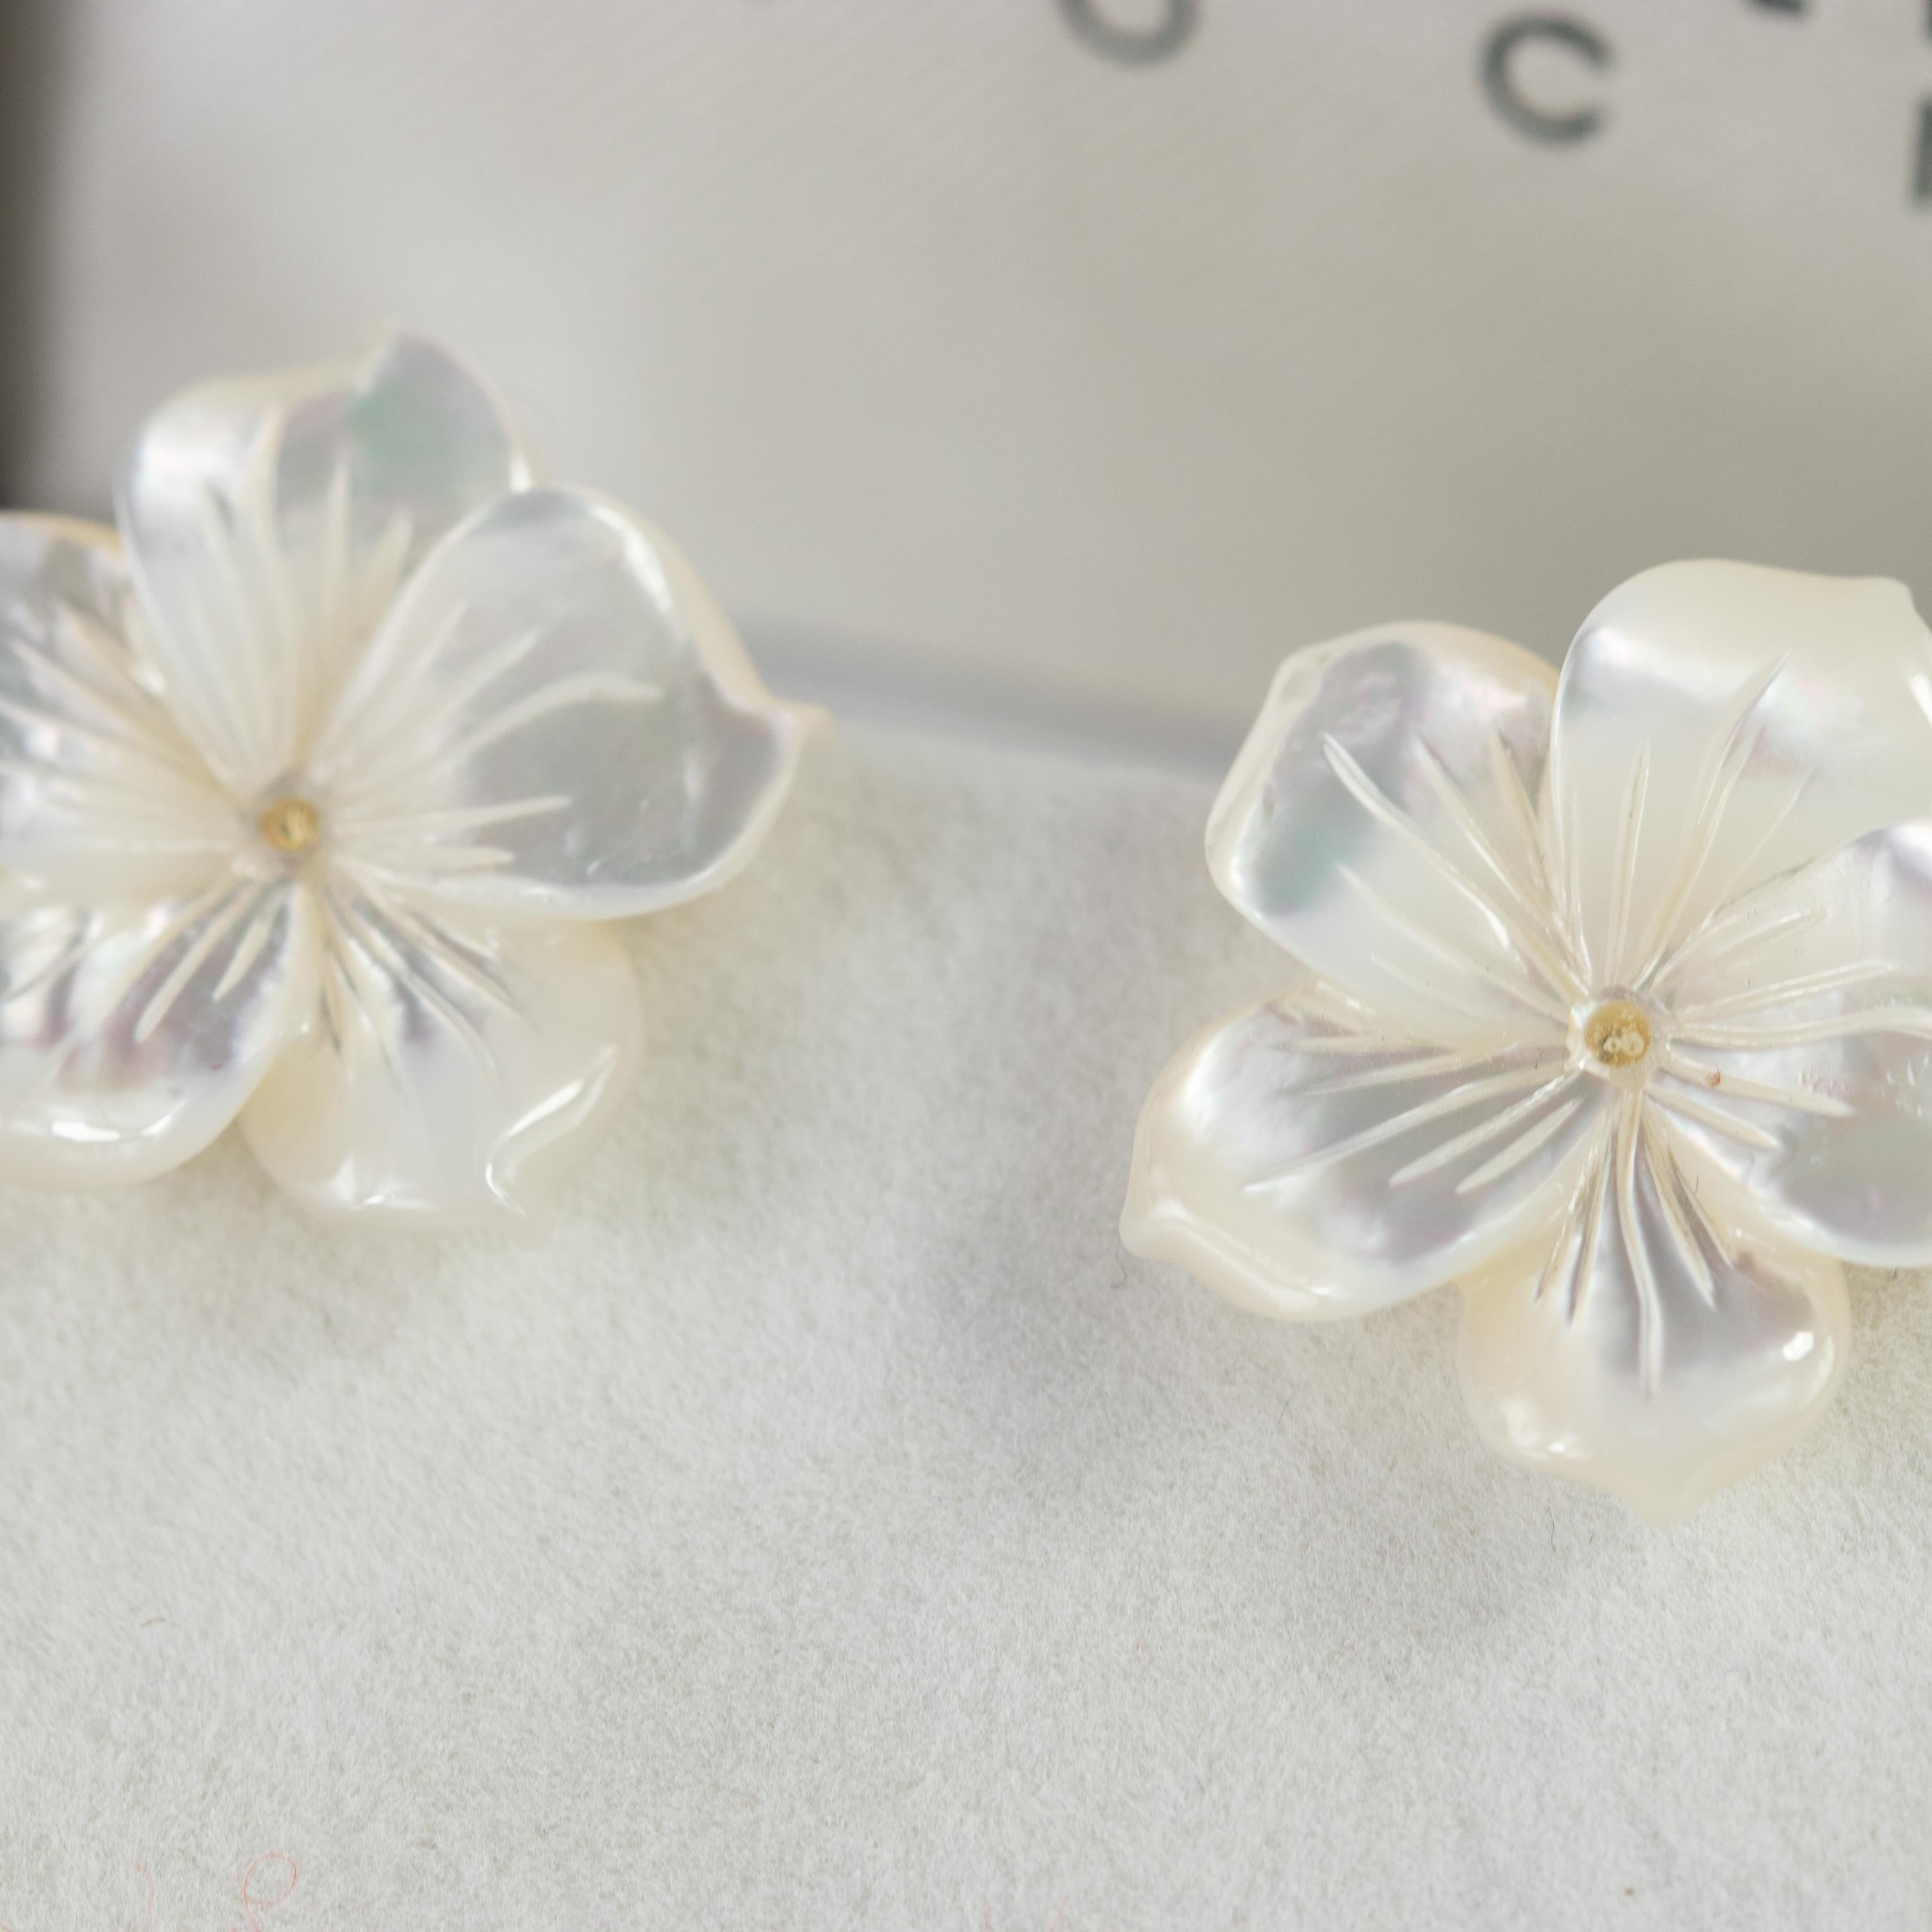 Mixed Cut Intini Jewels Mother of Pearl Carved White Flower 18 Karat Gold Stud Earrings For Sale